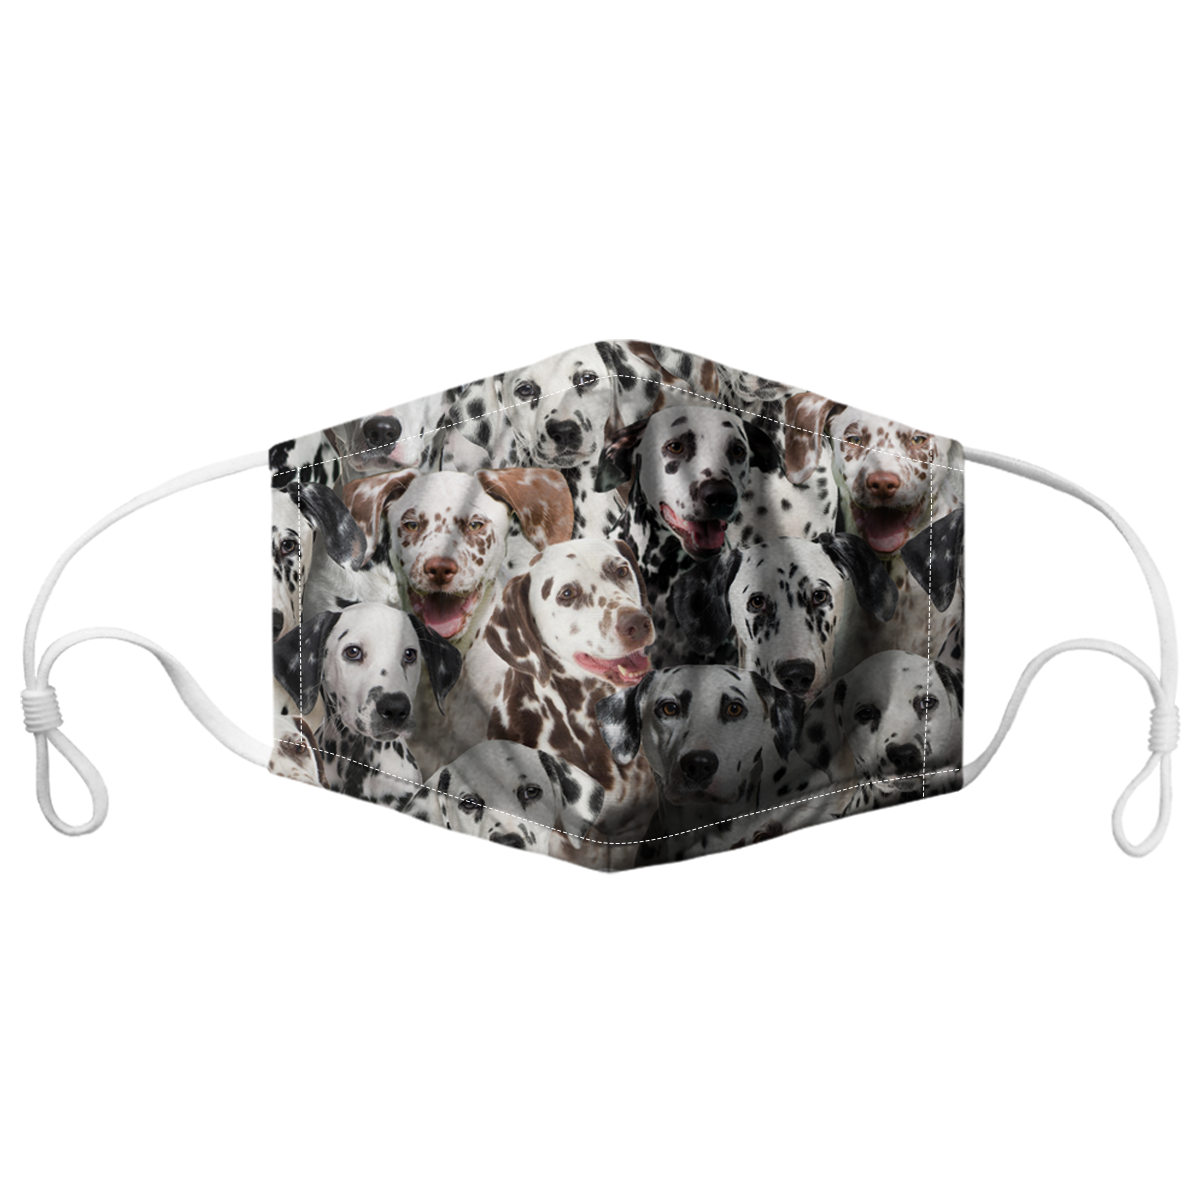 You Will Have A Bunch Of Dalmatians F-Mask